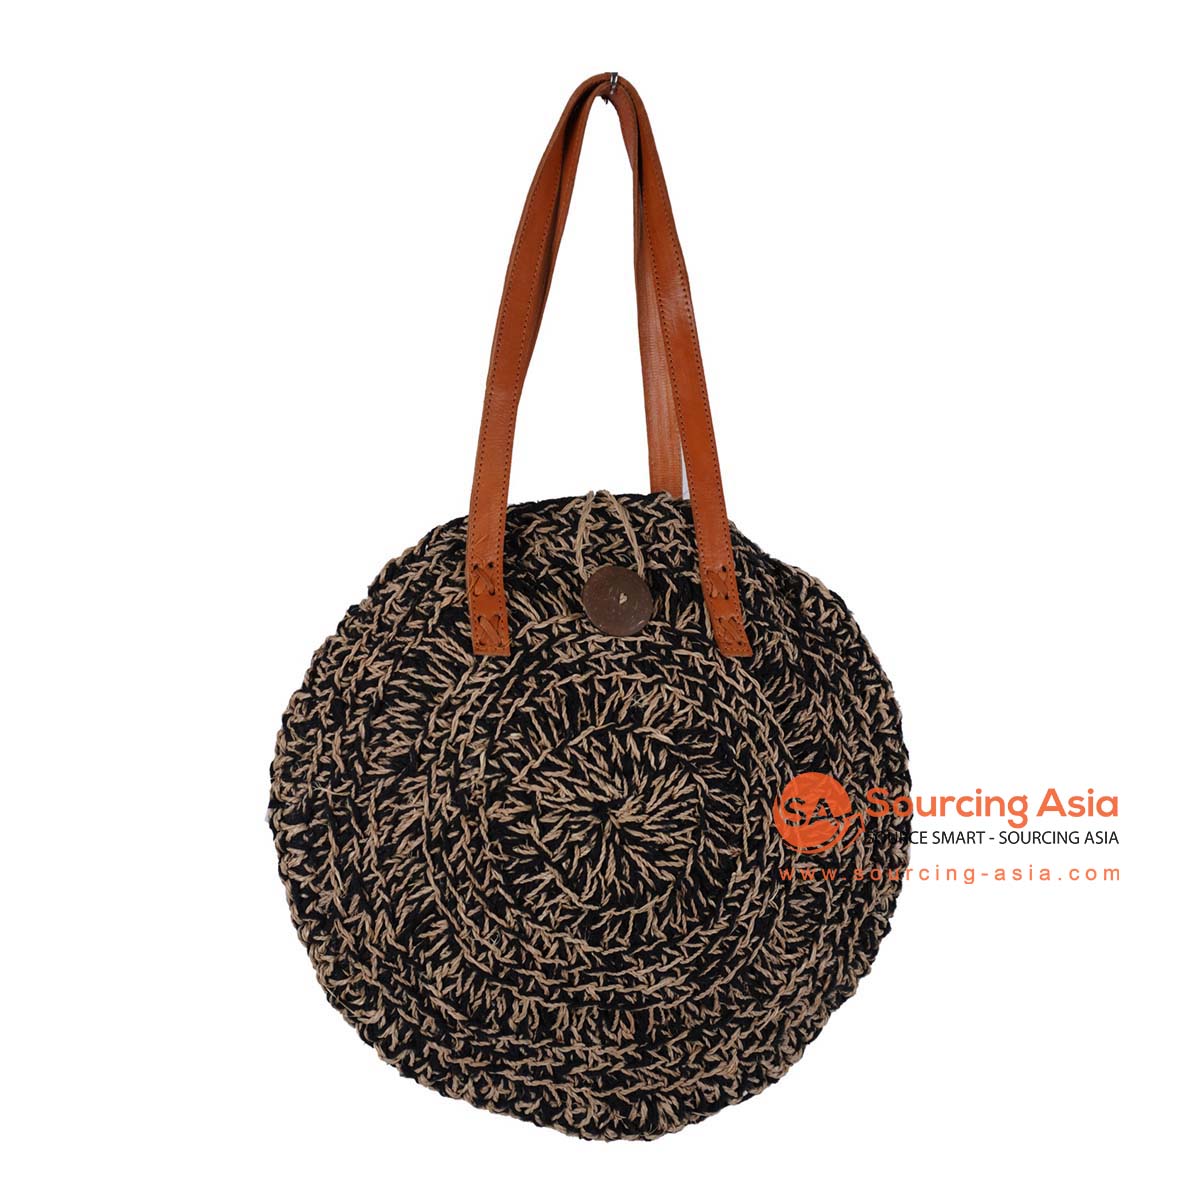 HBSC265 BROWN AGEL ROUND BAG WITH LEATHER HANDLE